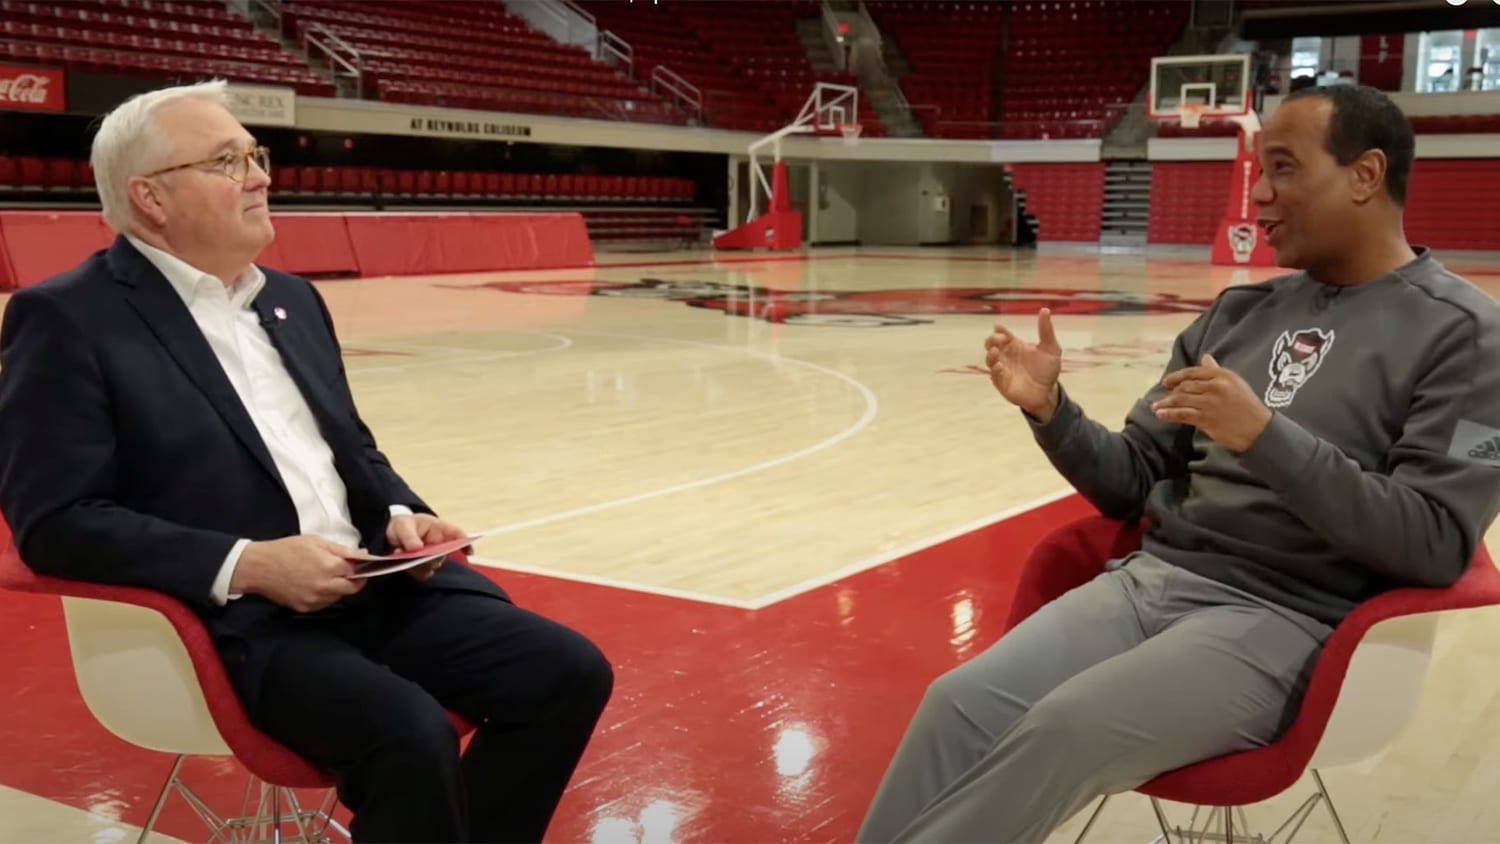 Randy Woodson and Kevin Keatts talk while sitting on a basketball court.